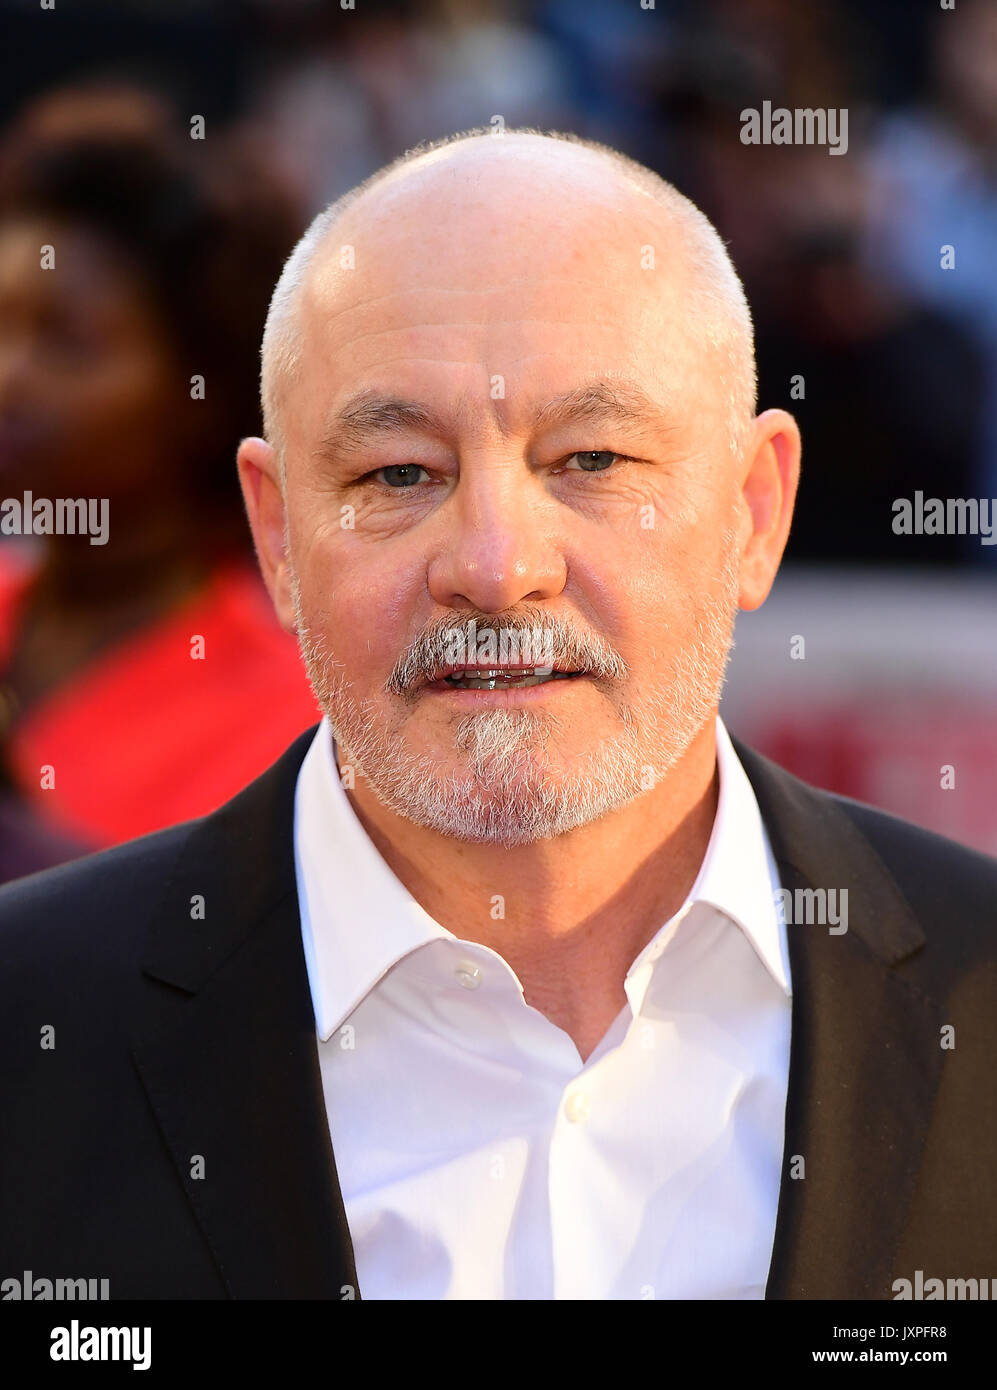 Barry Ackroyd attending the European premiere of Detroit held at the Curzon Mayfair, London. PRESS ASSOCIATION Photo. Picture date: Wednesday August 16, 2017. See PA story SHOWBIZ Detroit. Photo credit should read: Ian West/PA Wire Stock Photo